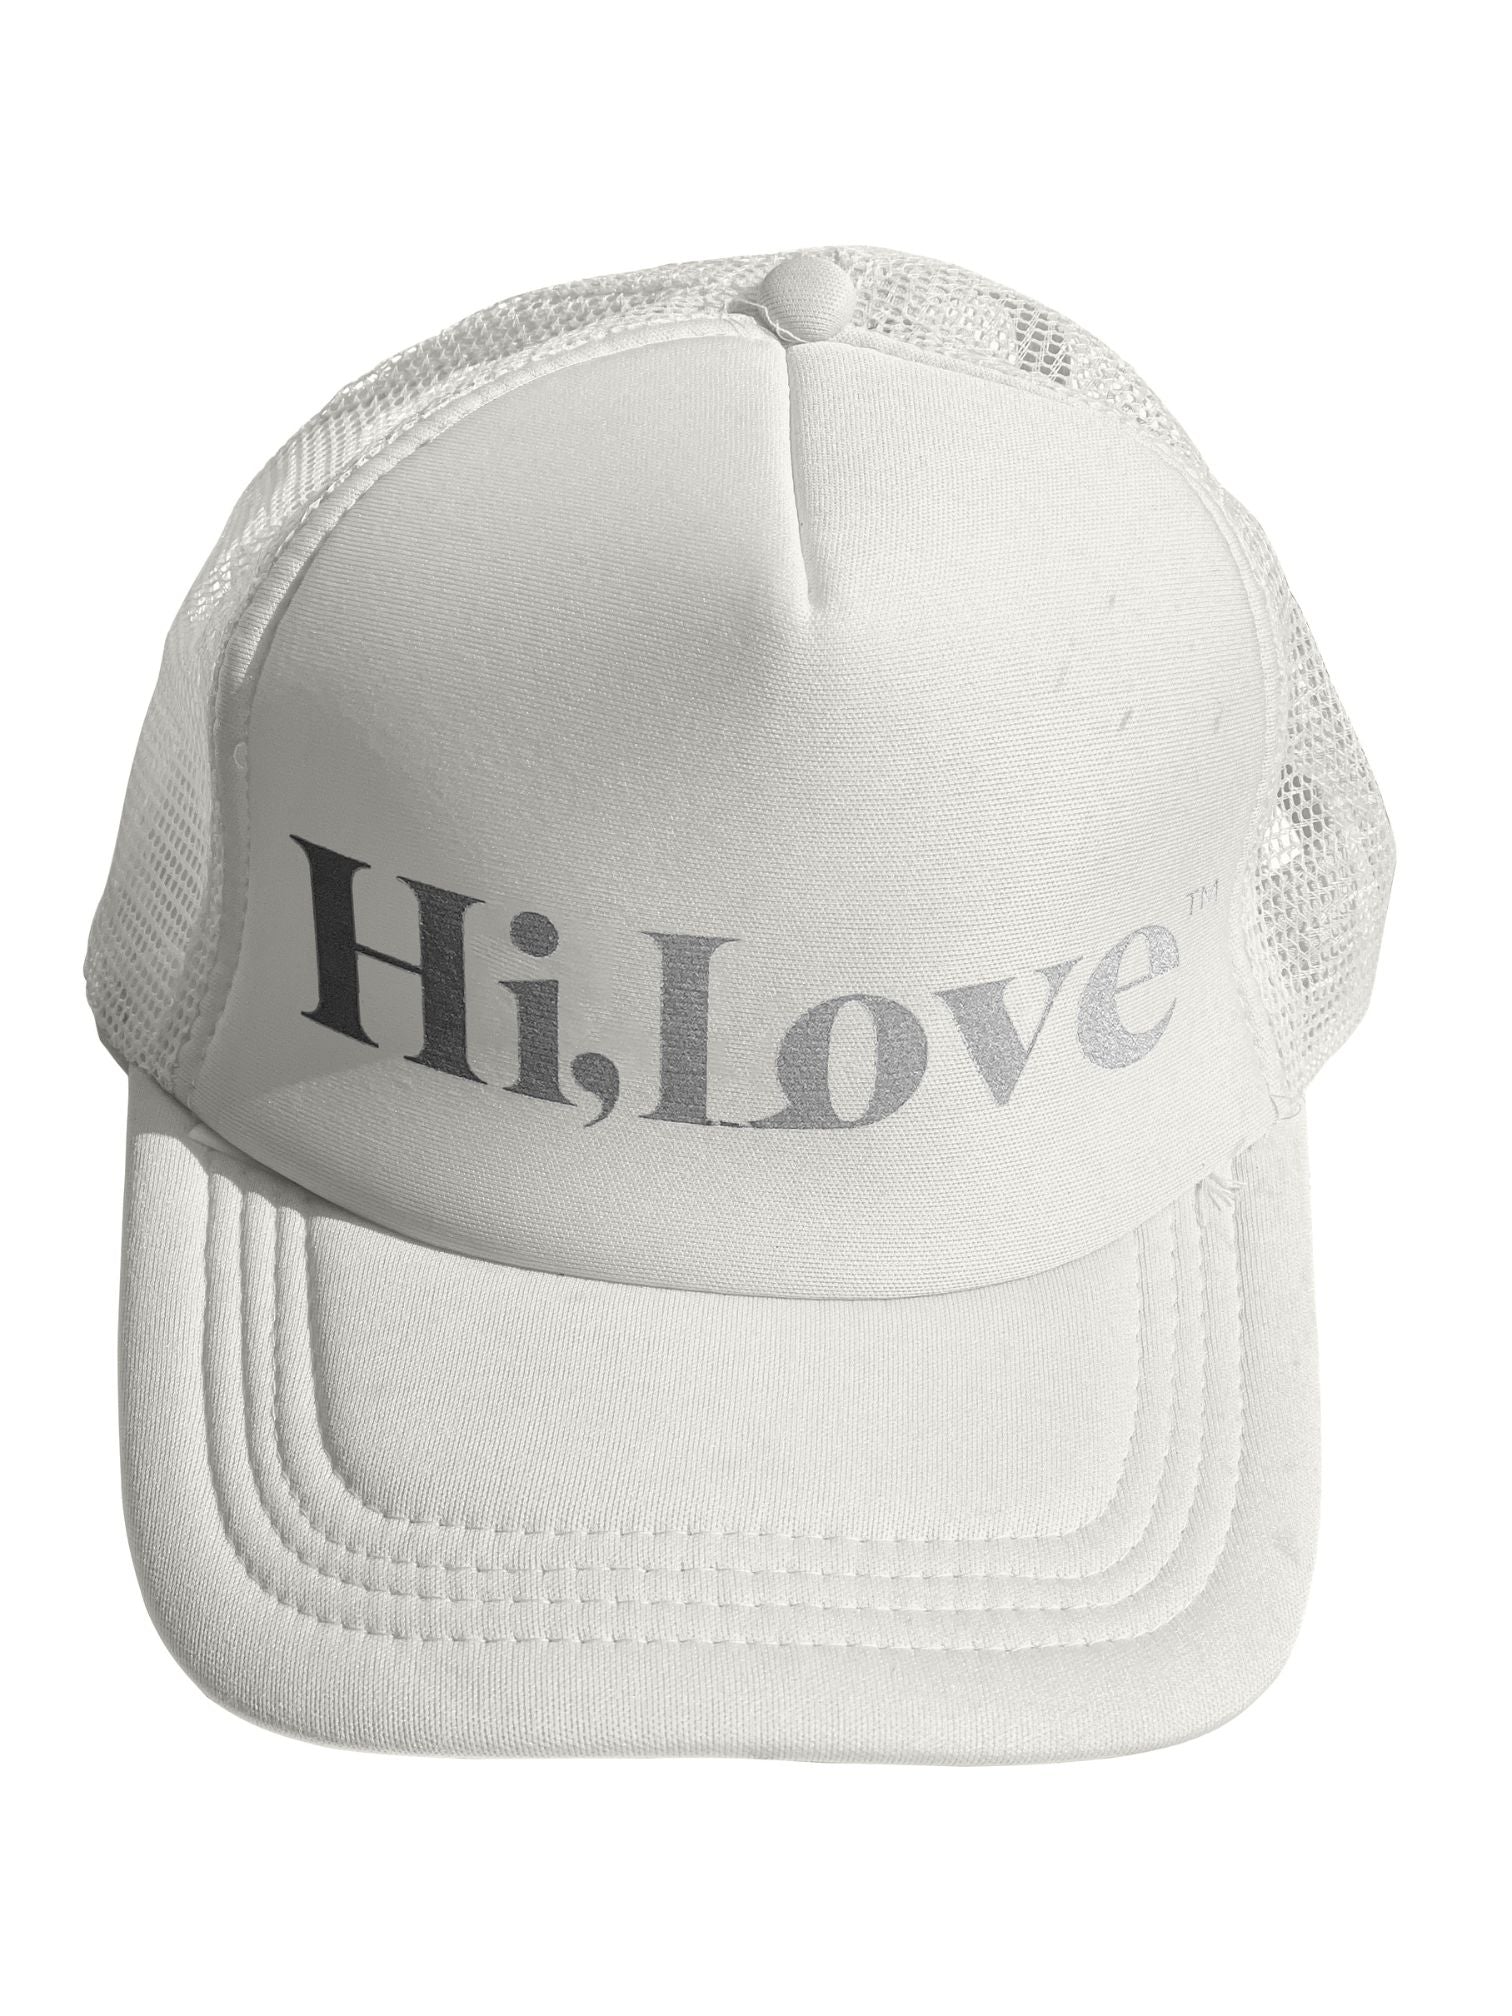 white baseball hat with silver "hi, love"